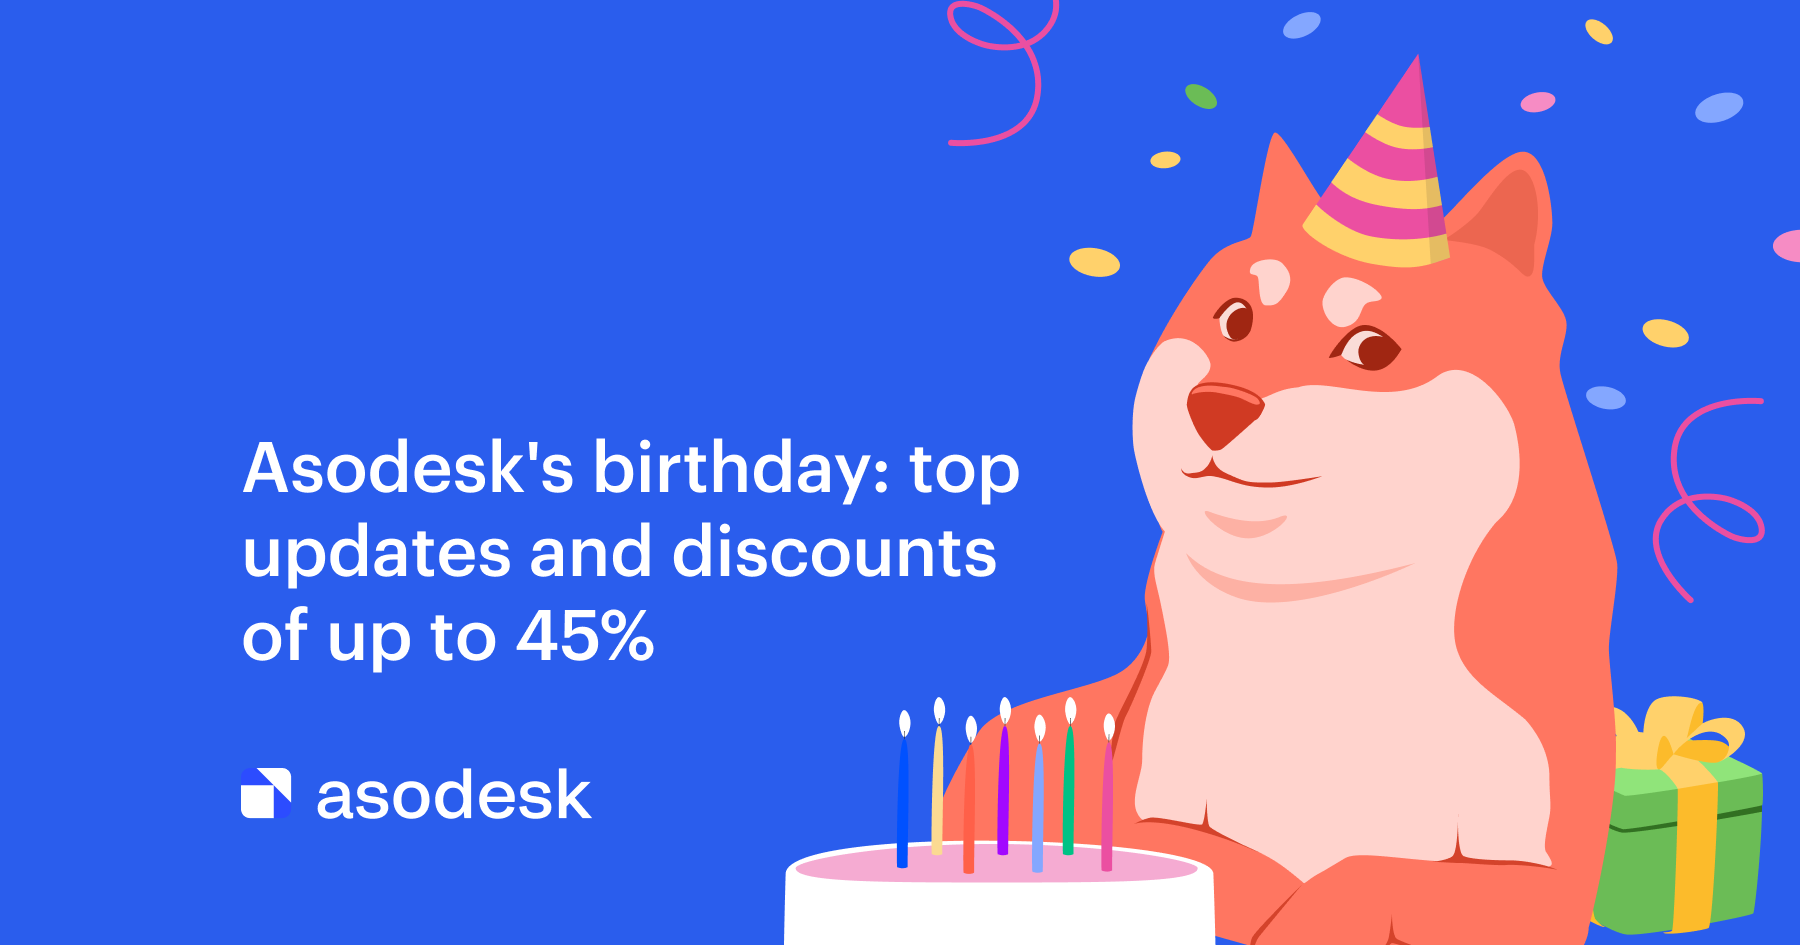 Asodesk's birthday: top updates and discounts of up to 45%